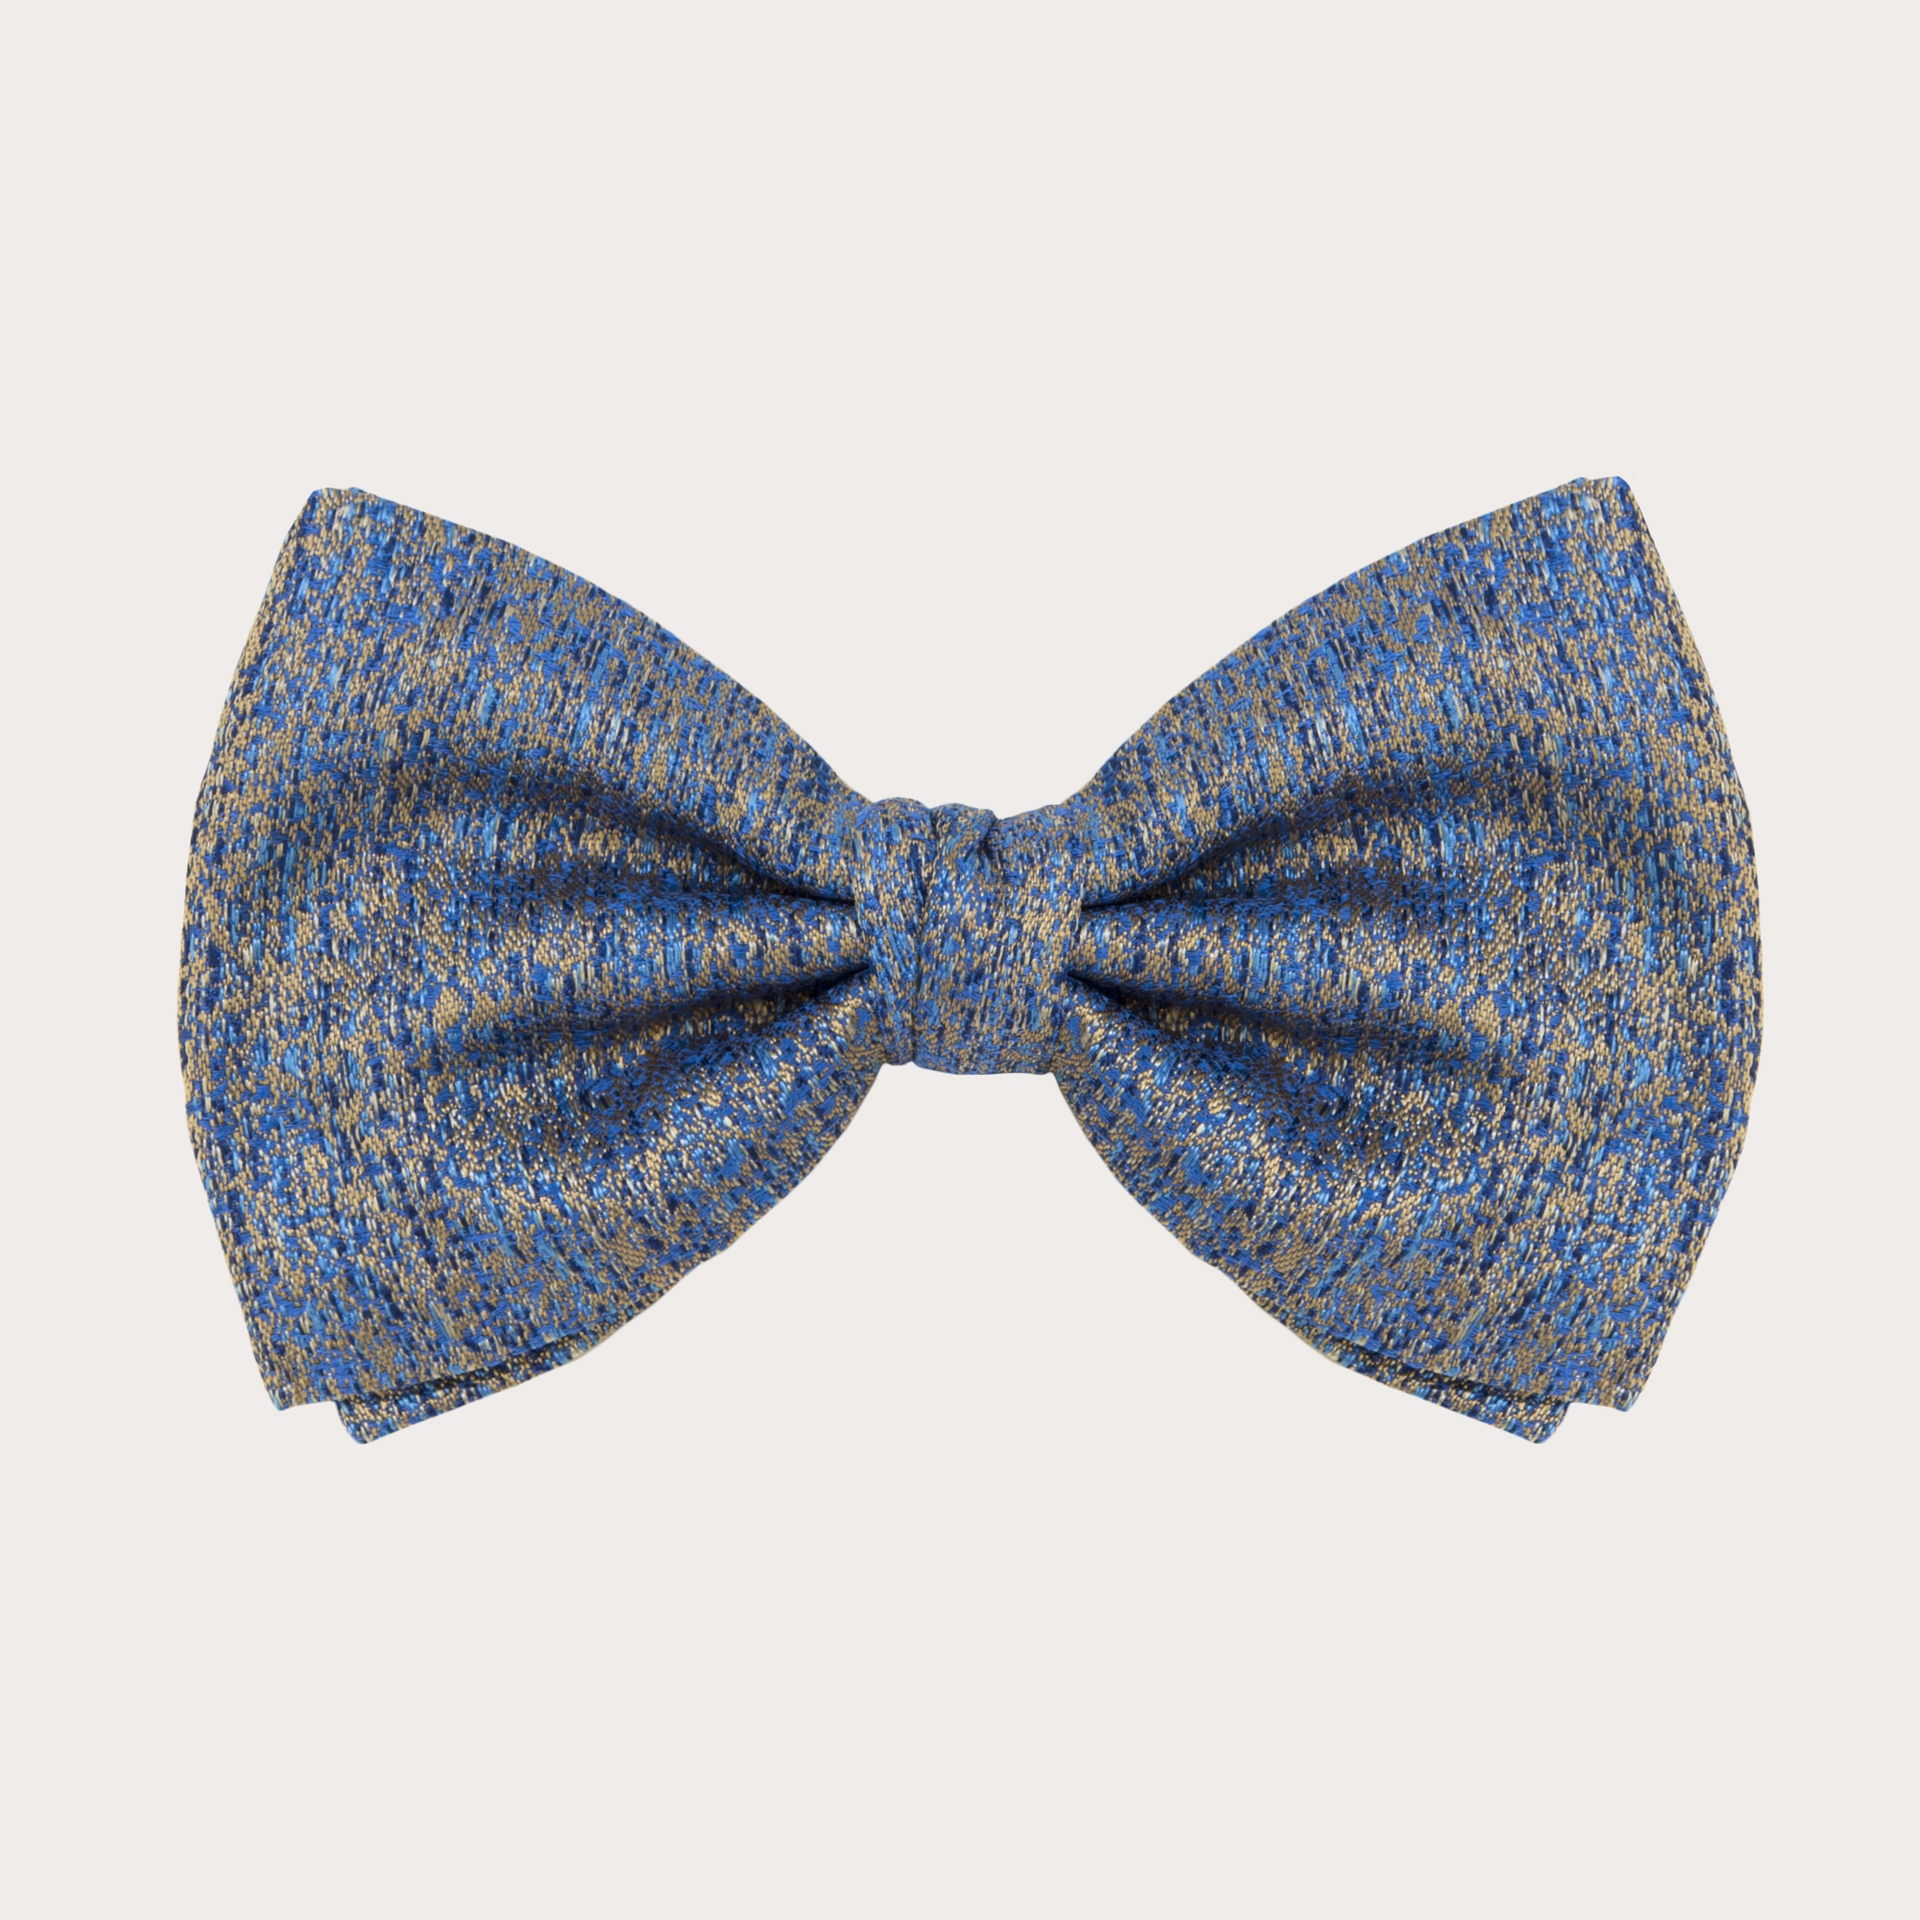 BRUCLE Ceremony bow tie in iridescent jacquard silk, gold, light blue and blue